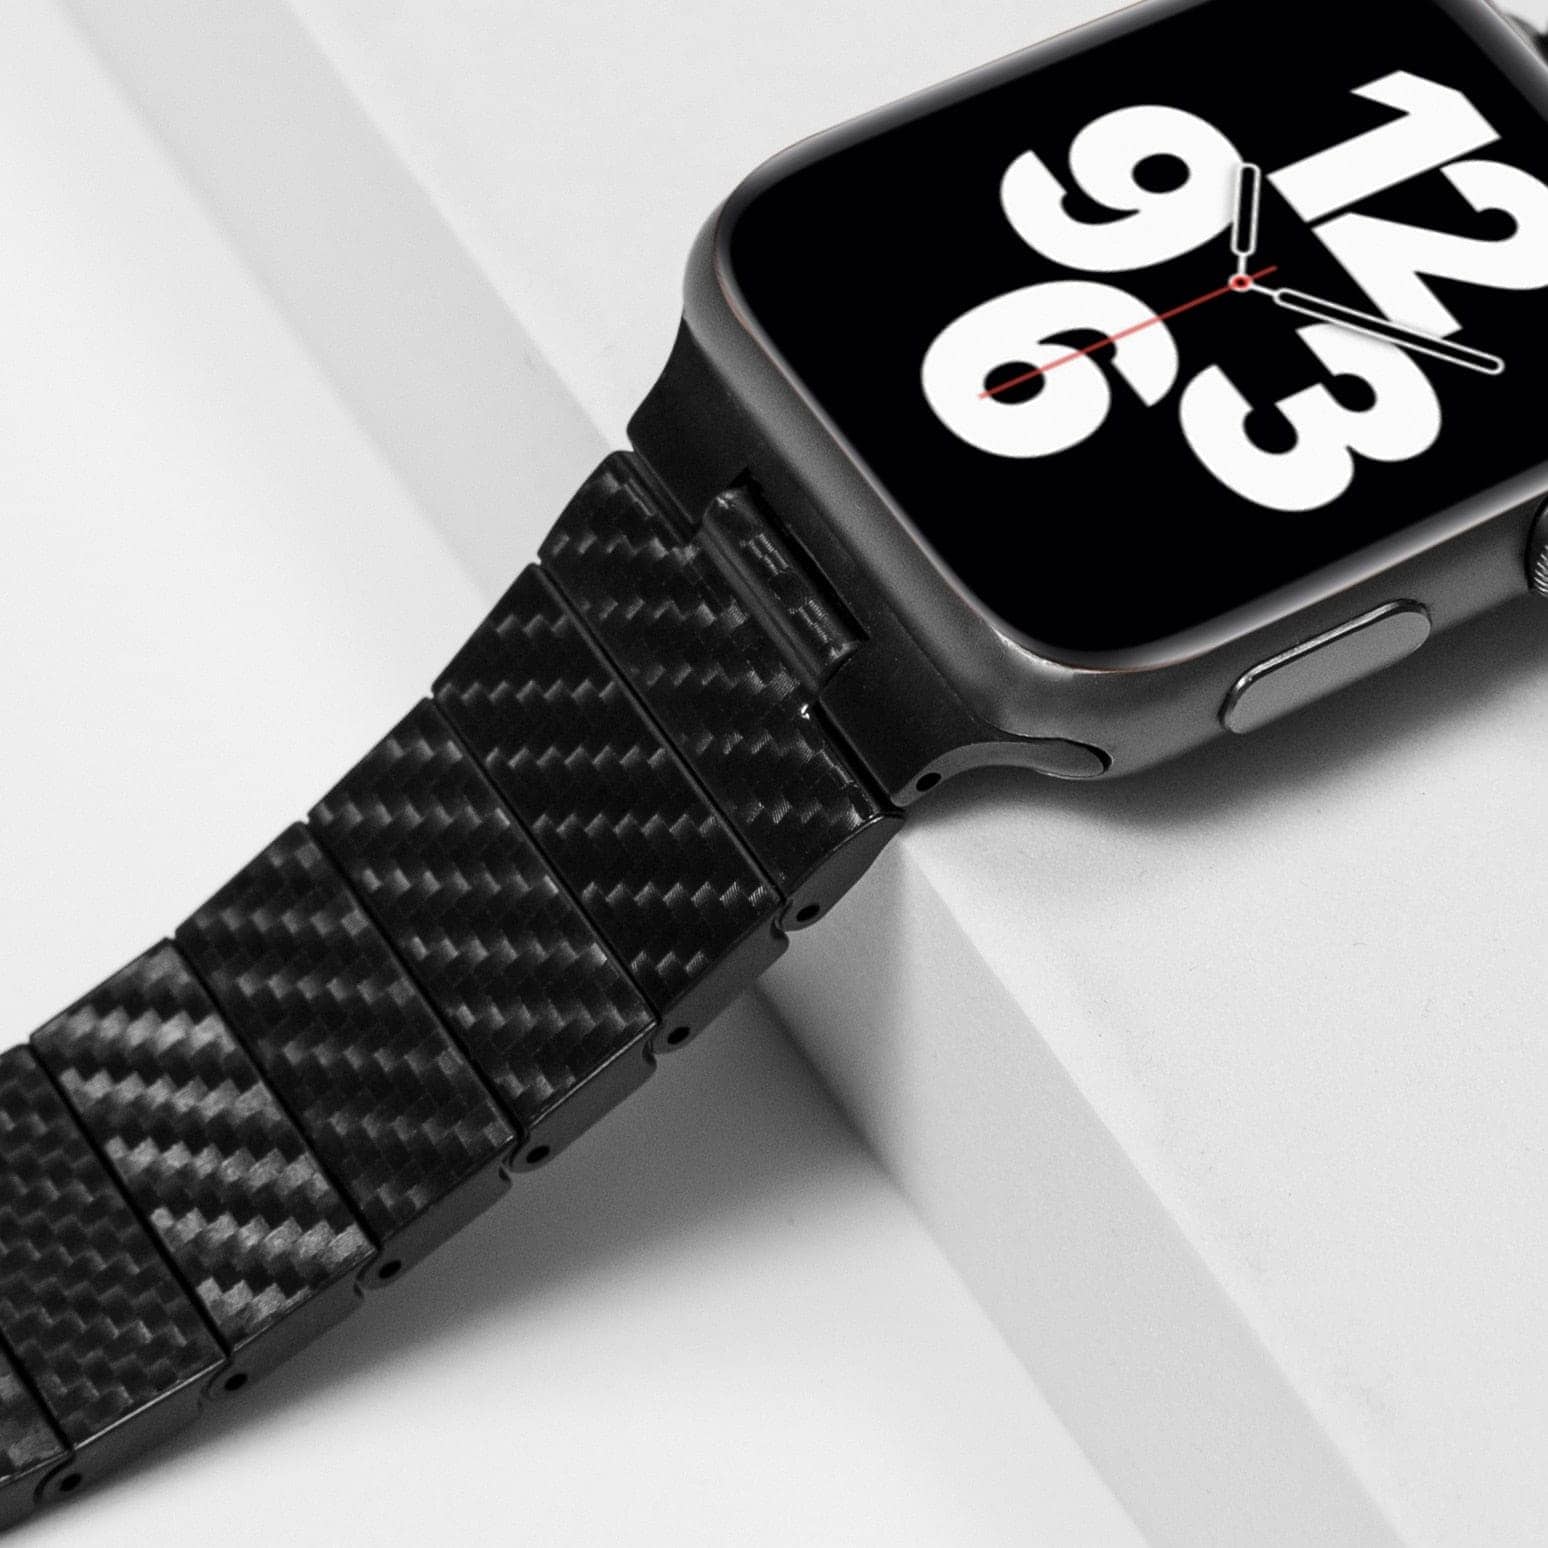 The Cyborg - for Apple Watch | Bands Carbon Loops Infinity Fiber Watch